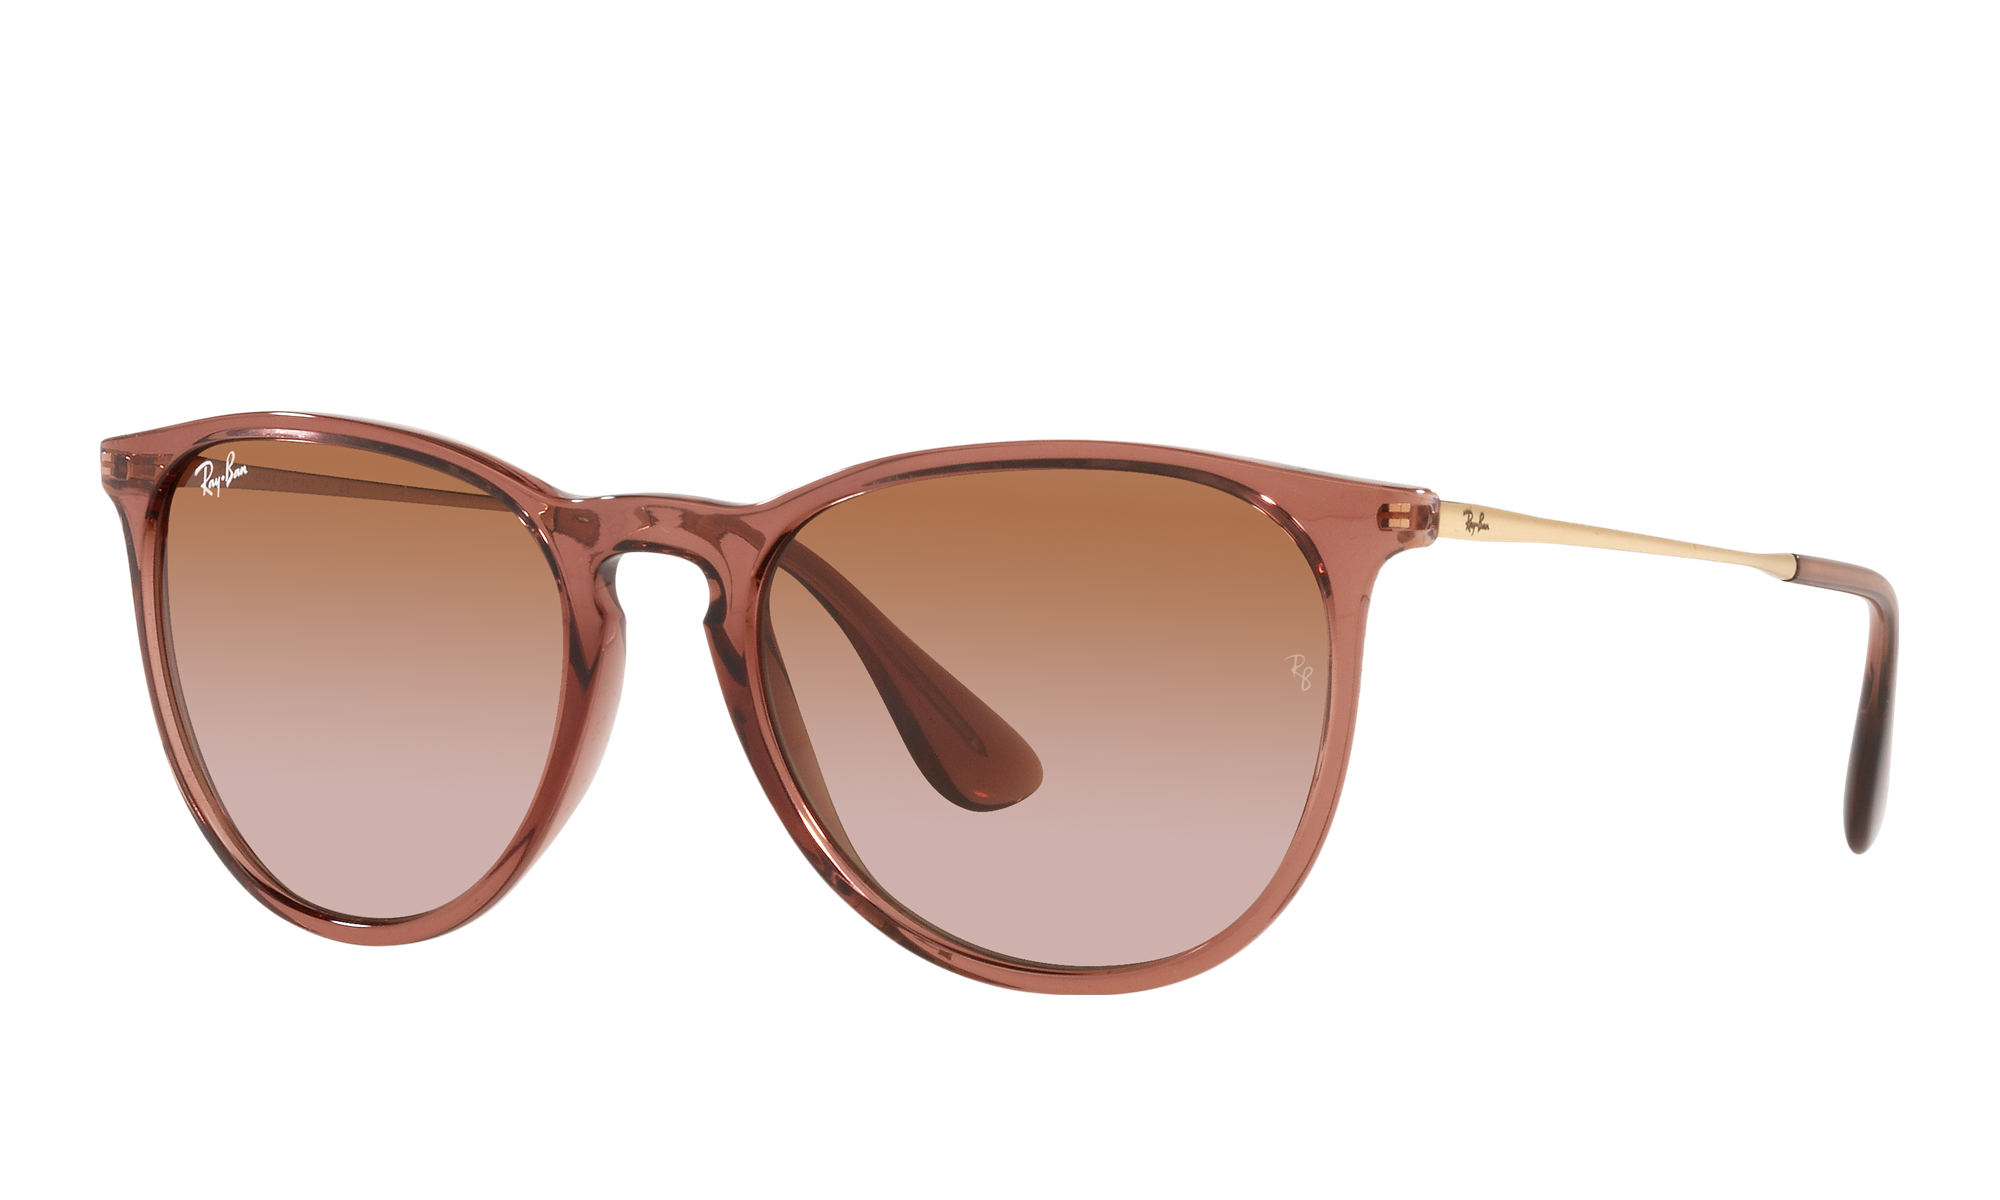 Ray-Ban Unisex Rb4171 Transparent Light Brown Size: Standard